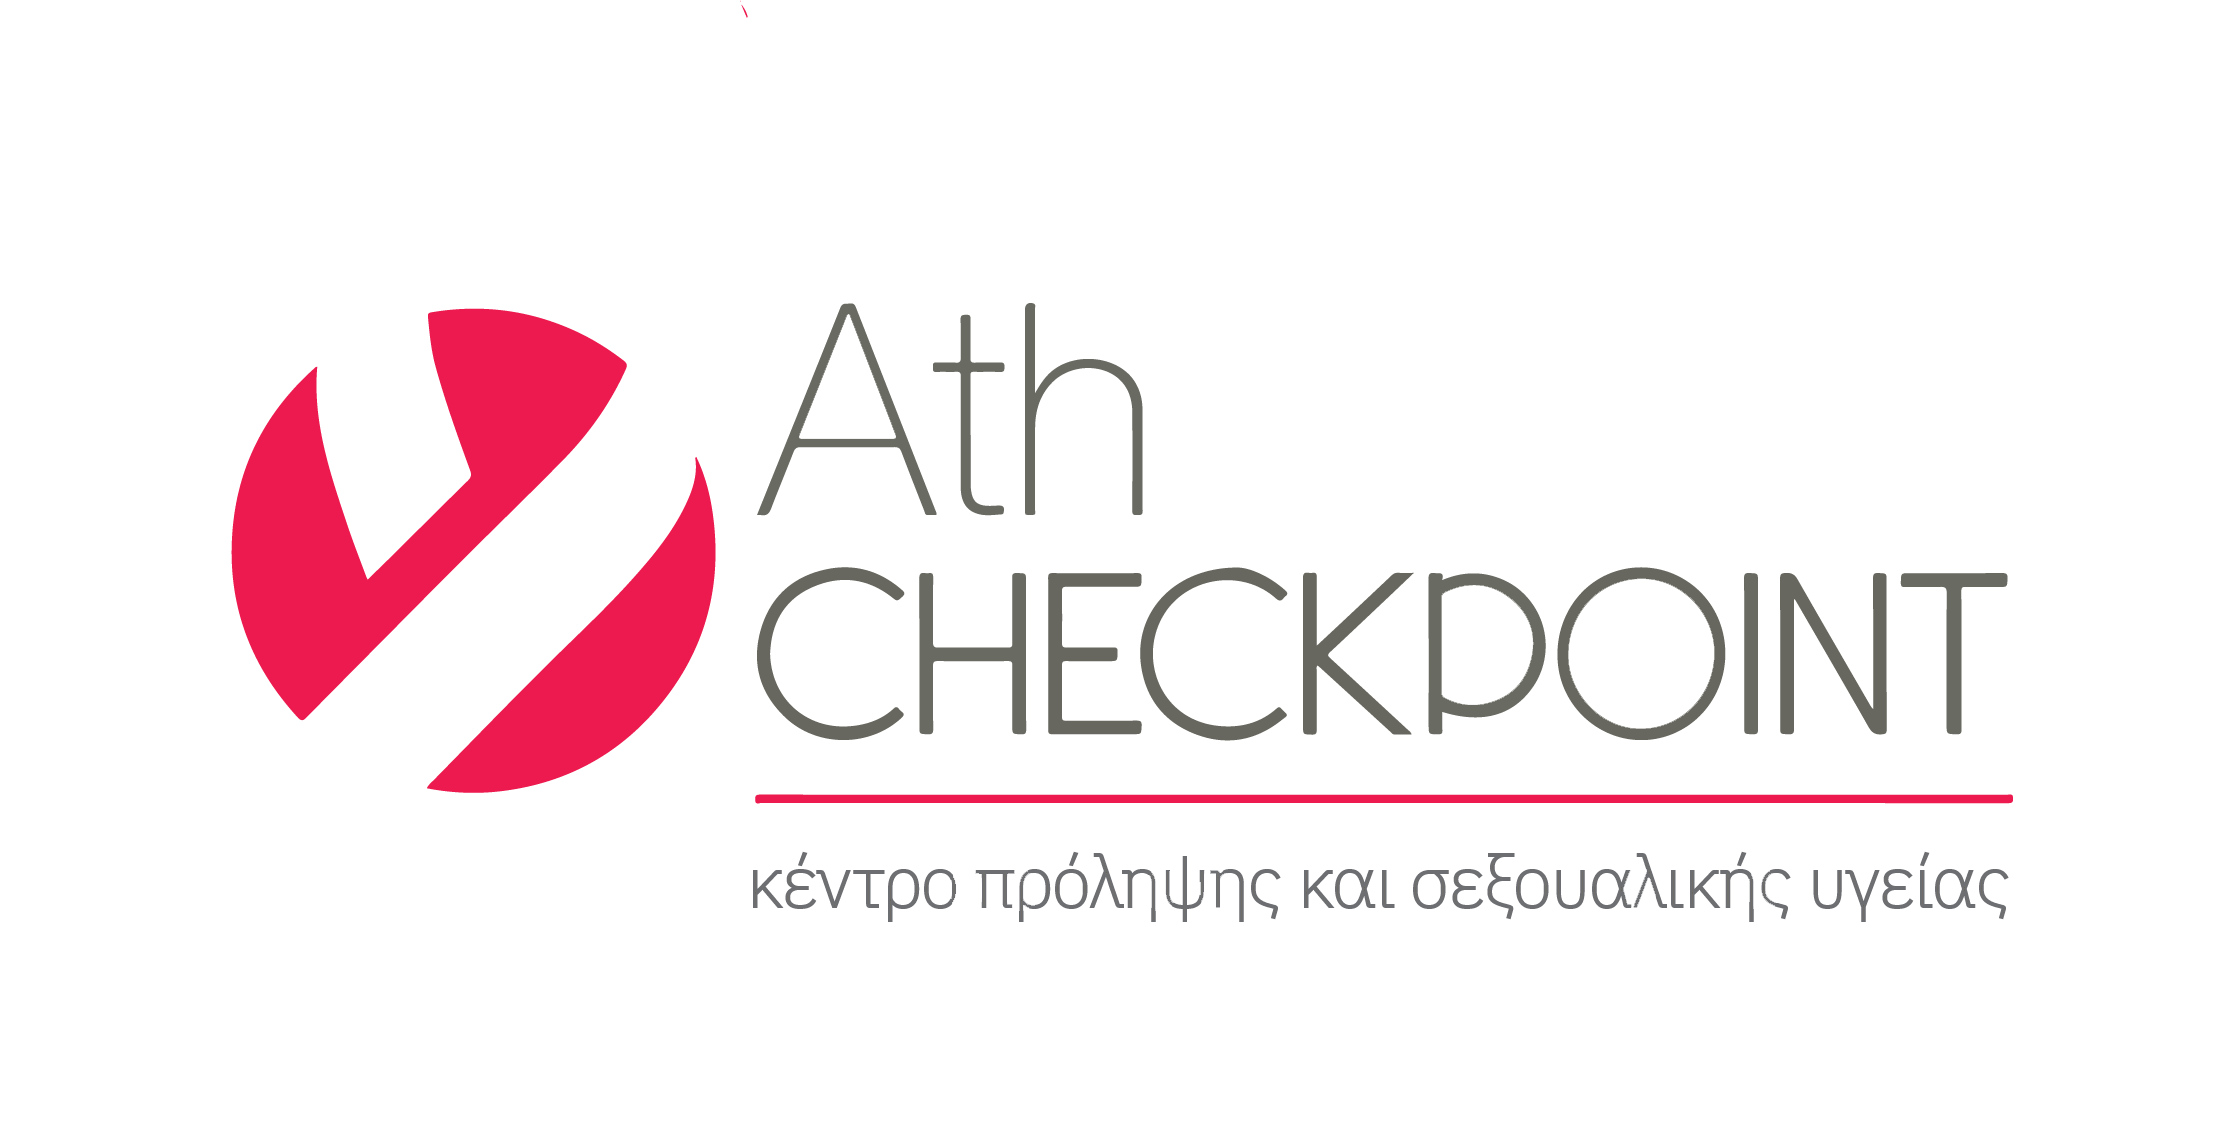 Ath Checkpoint